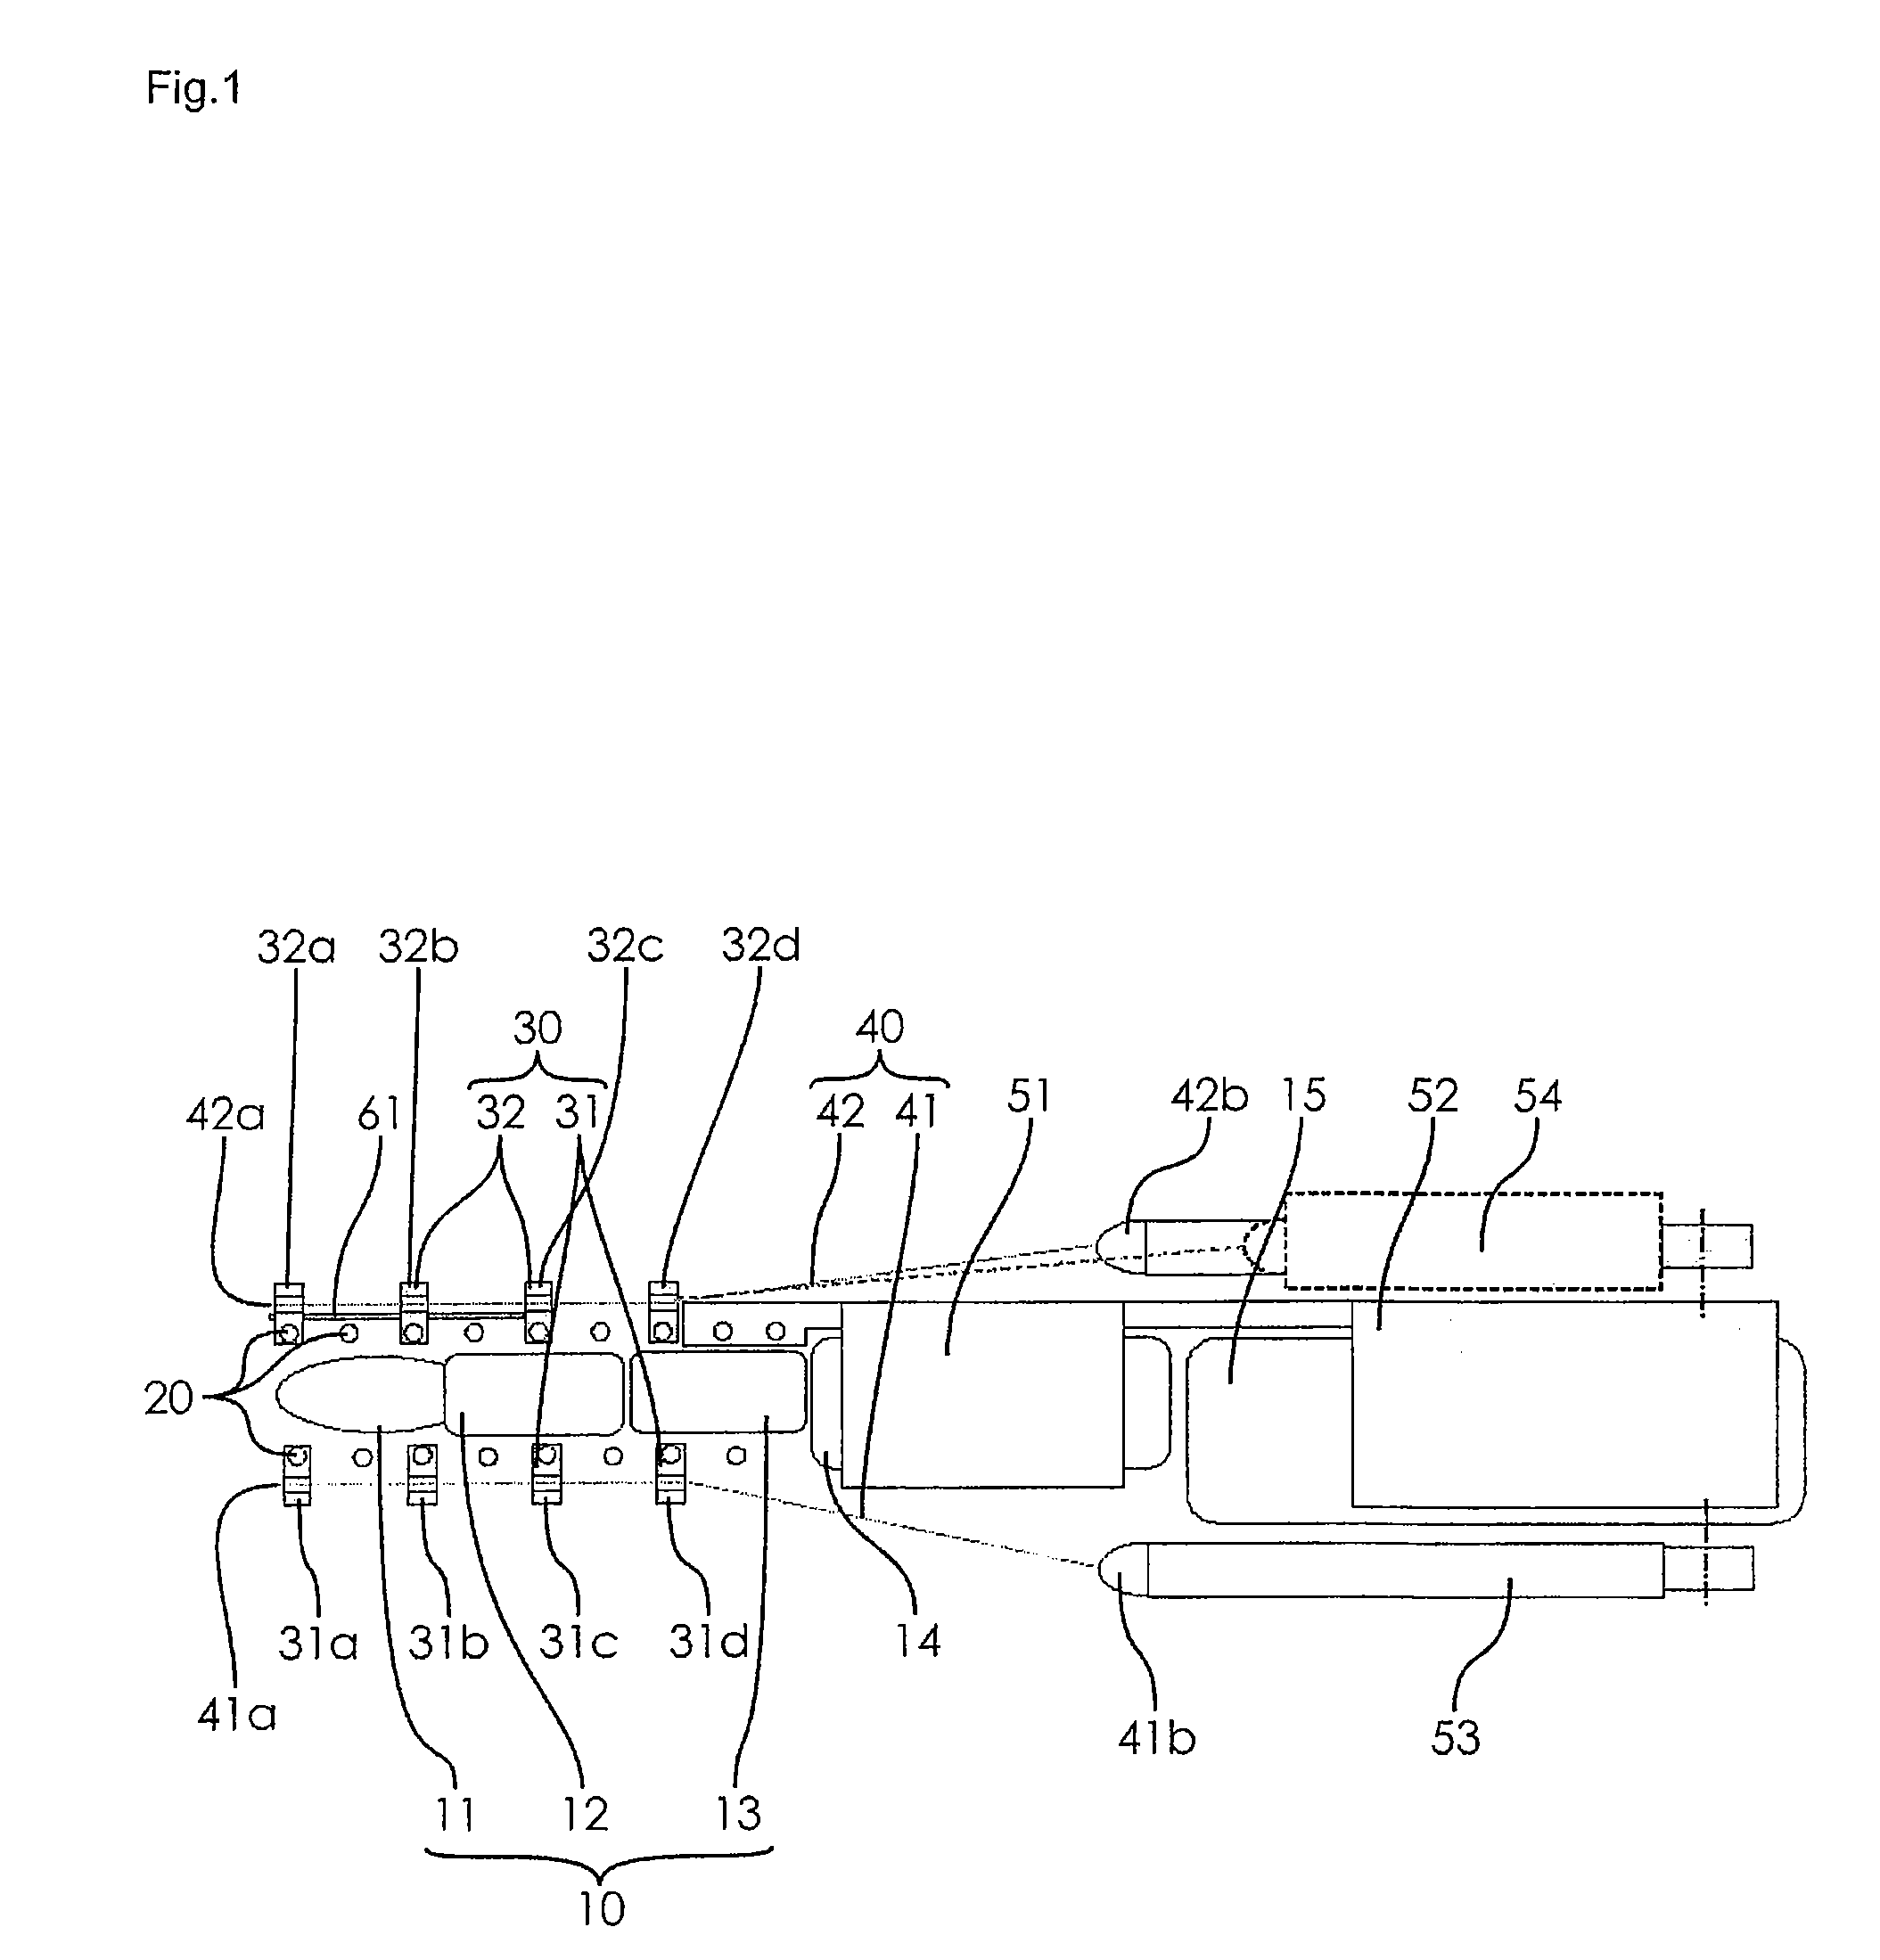 Finger motion assisting apparatus